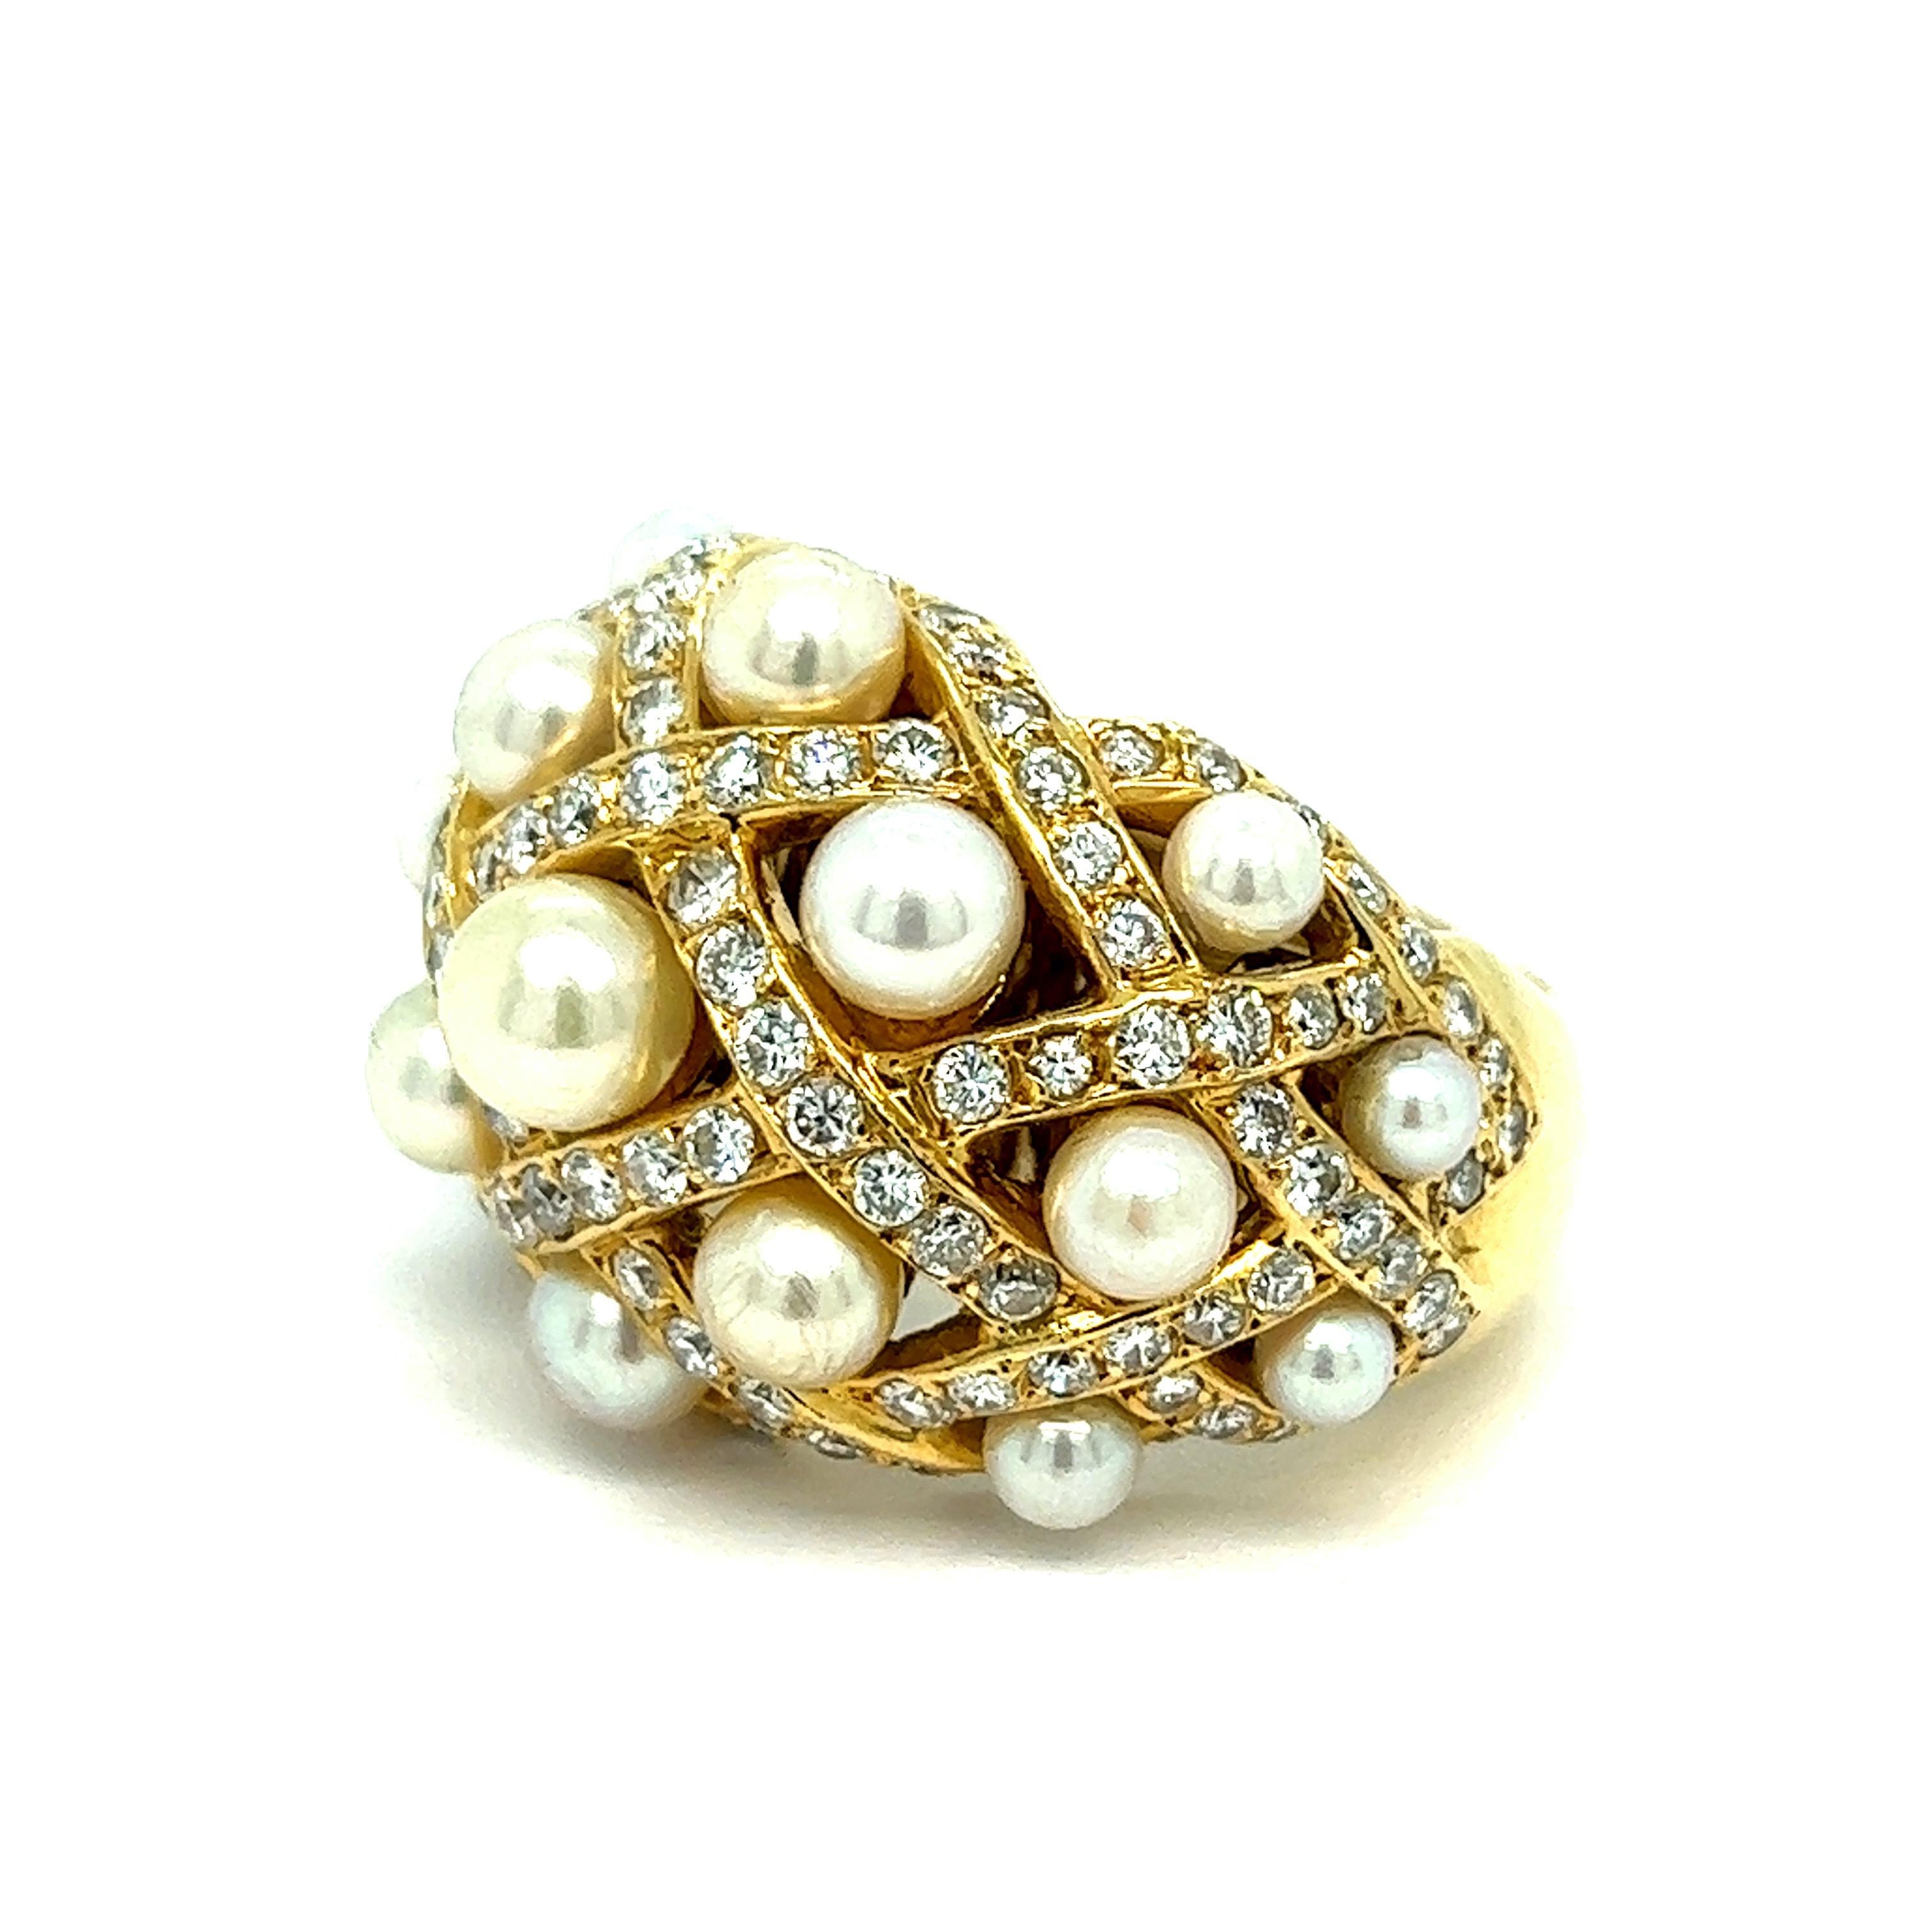 French cultured pearls diamond gold ring, circa 1970s

Seventeen cultured pearls of varying sizes, round-cut diamonds, set on 18 karat yellow gold

Size: 6.5 US; top width 0.75 inch
Total weight: 18.0 grams